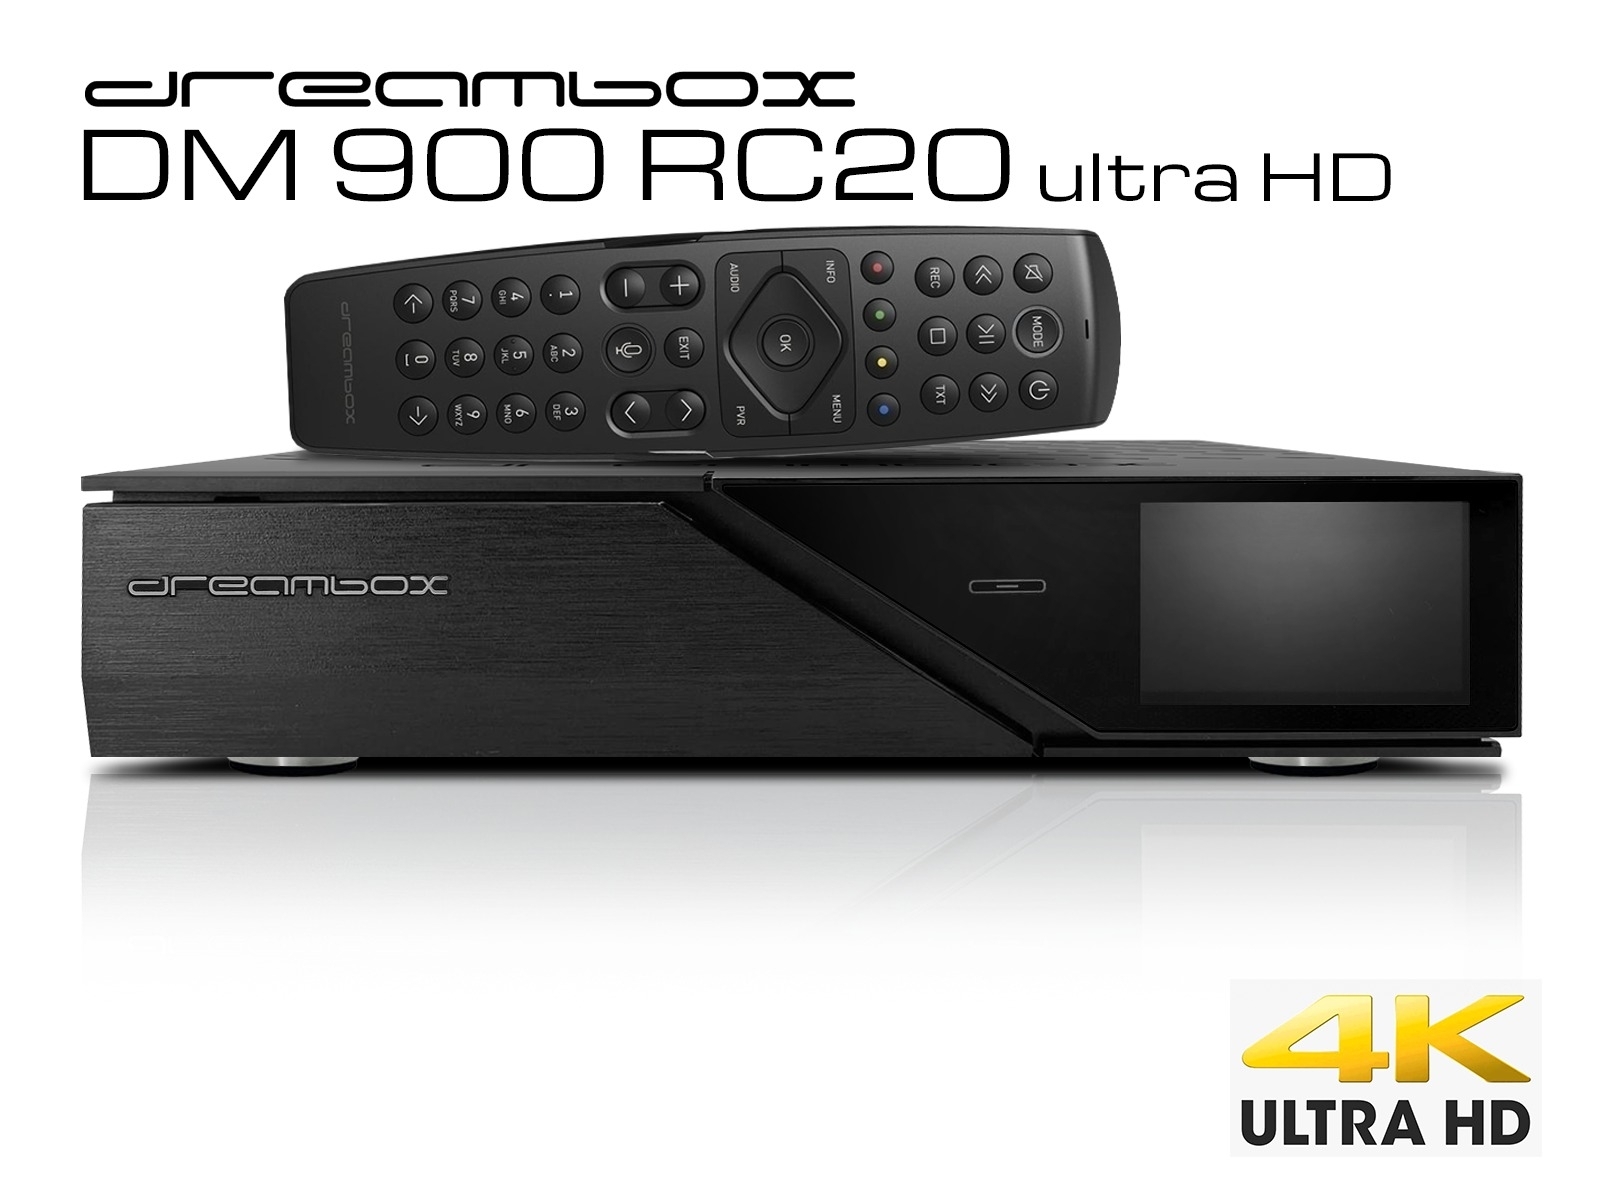 Dreambox DM900 UHD 4K 2x DVB-S2X / 1x DVB-C/T2 Triple MS Tuner E2 Linux PVR Receiver Dreambox DM900 RC20 UHD 4K 2x DVB-S2X / 1x DVB-C/T2 Triple MS Tuner E2 Linux PVR ready Receiver